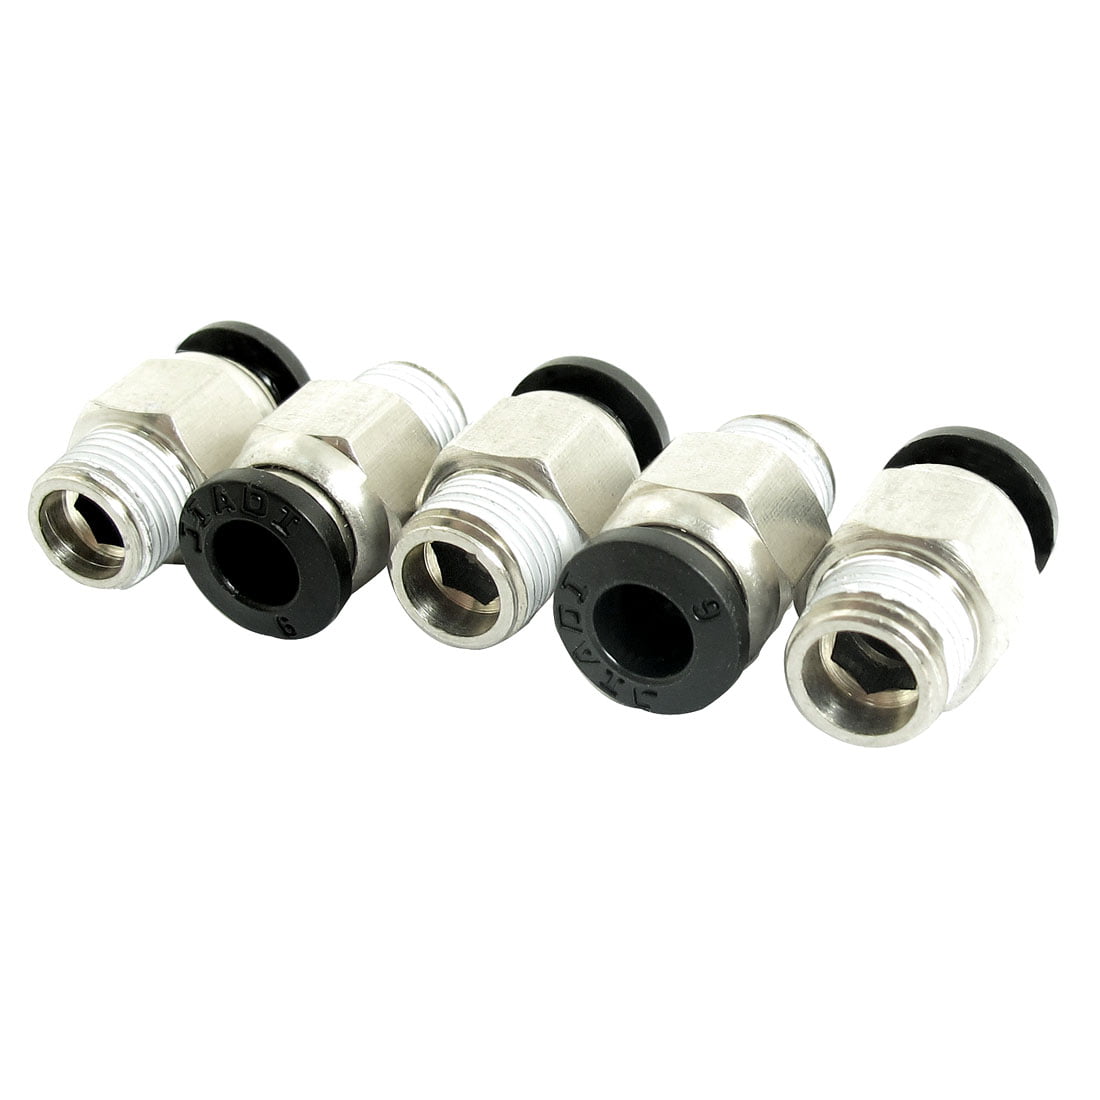 10Pcs Tube OD 6mm x 1/8BSP Pneumatic Straight Connector Quick Release Fitting 